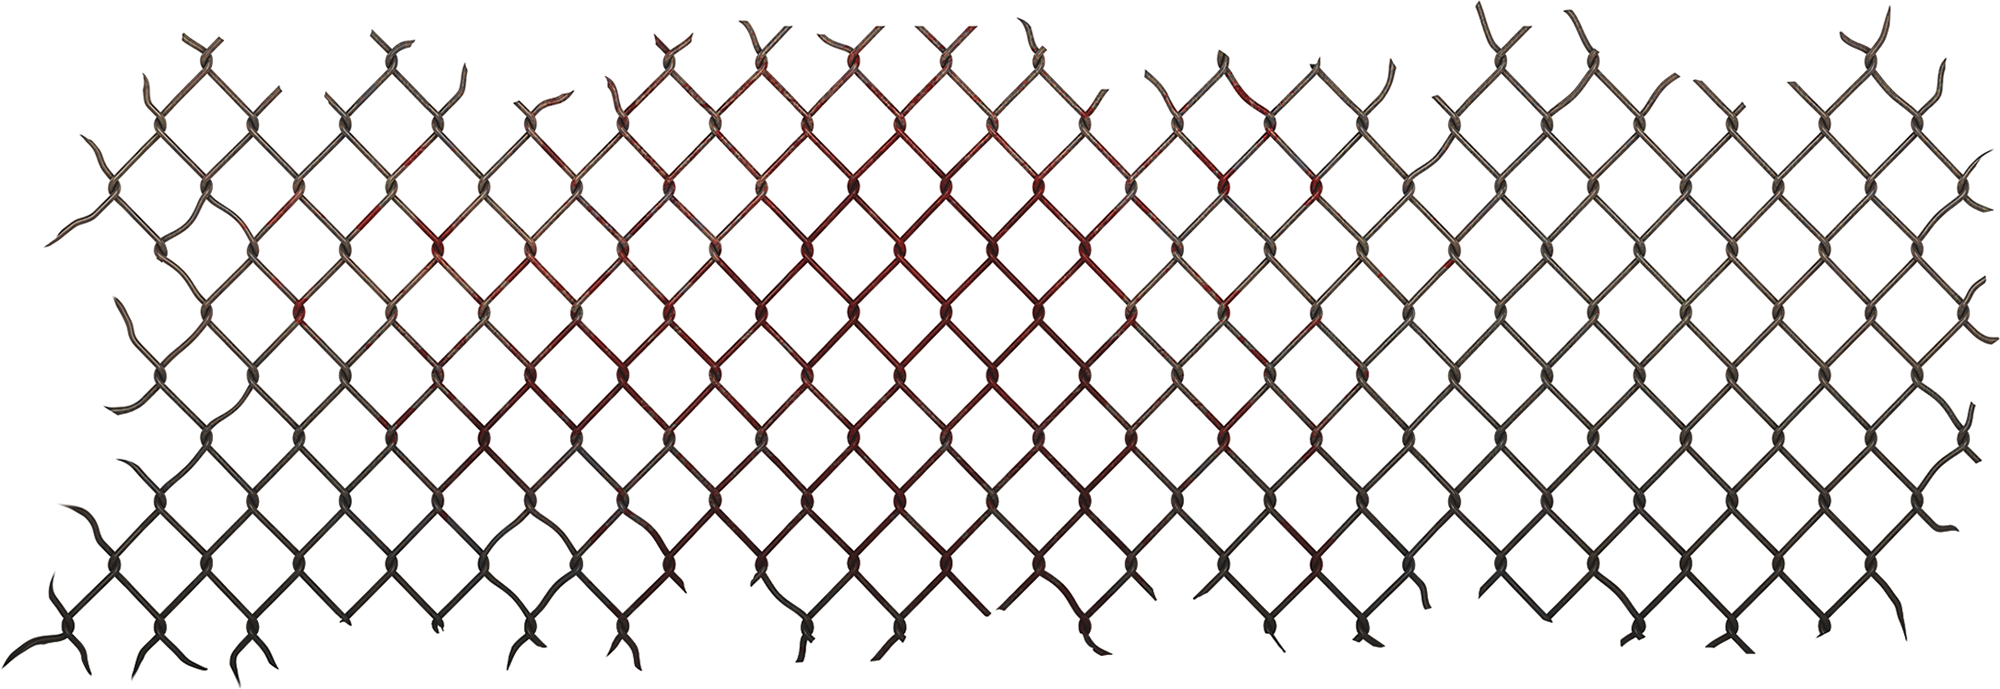 A Close Up Of A Chain Link Fence